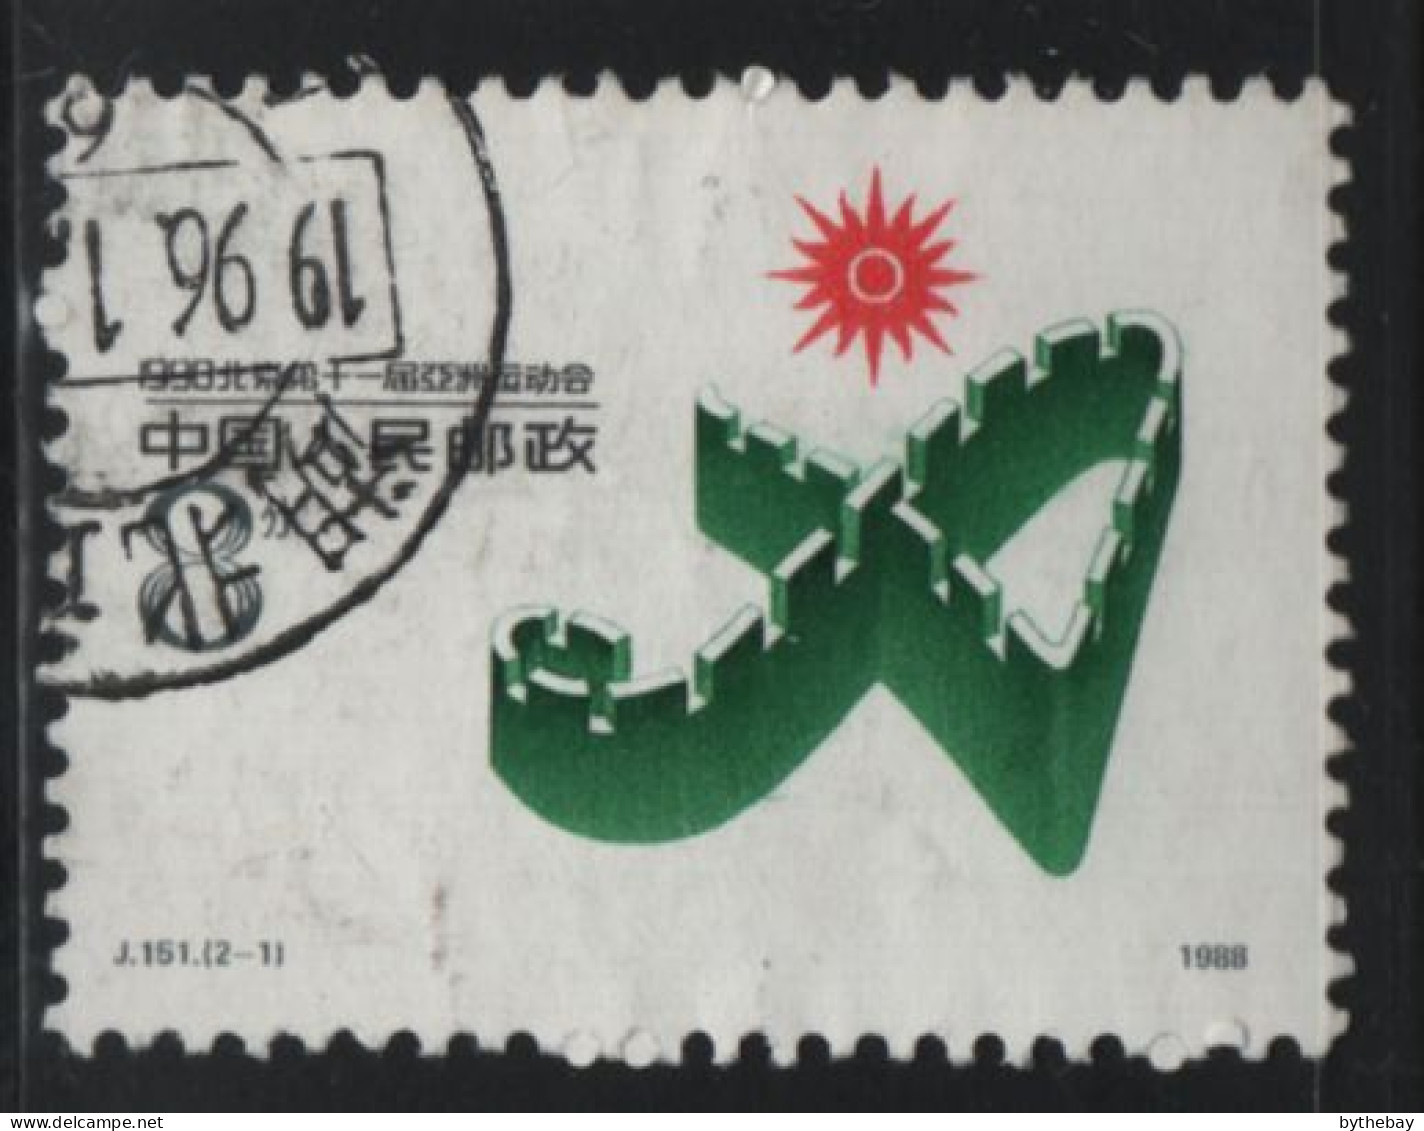 China People's Republic 1988 Used Sc 2158 8f Emblem 11th Asian Games - Gebraucht